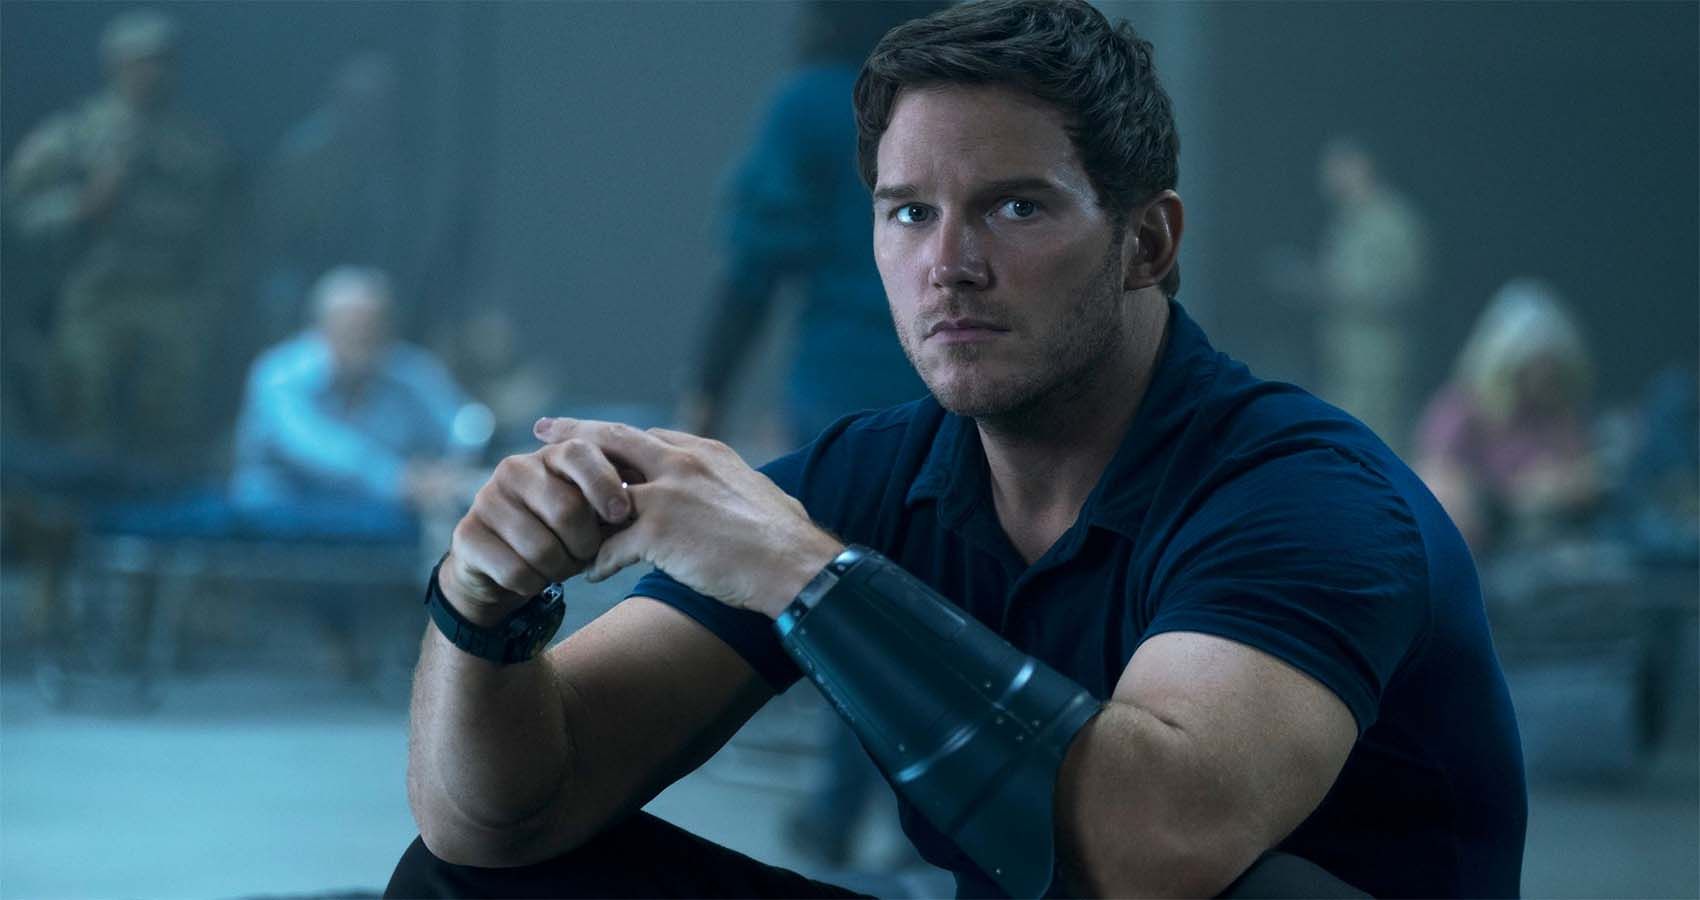 Chris Pratt Addresses Outrage Over Religious Beliefs, Alleged Ties to Anti-LGBTQ Church